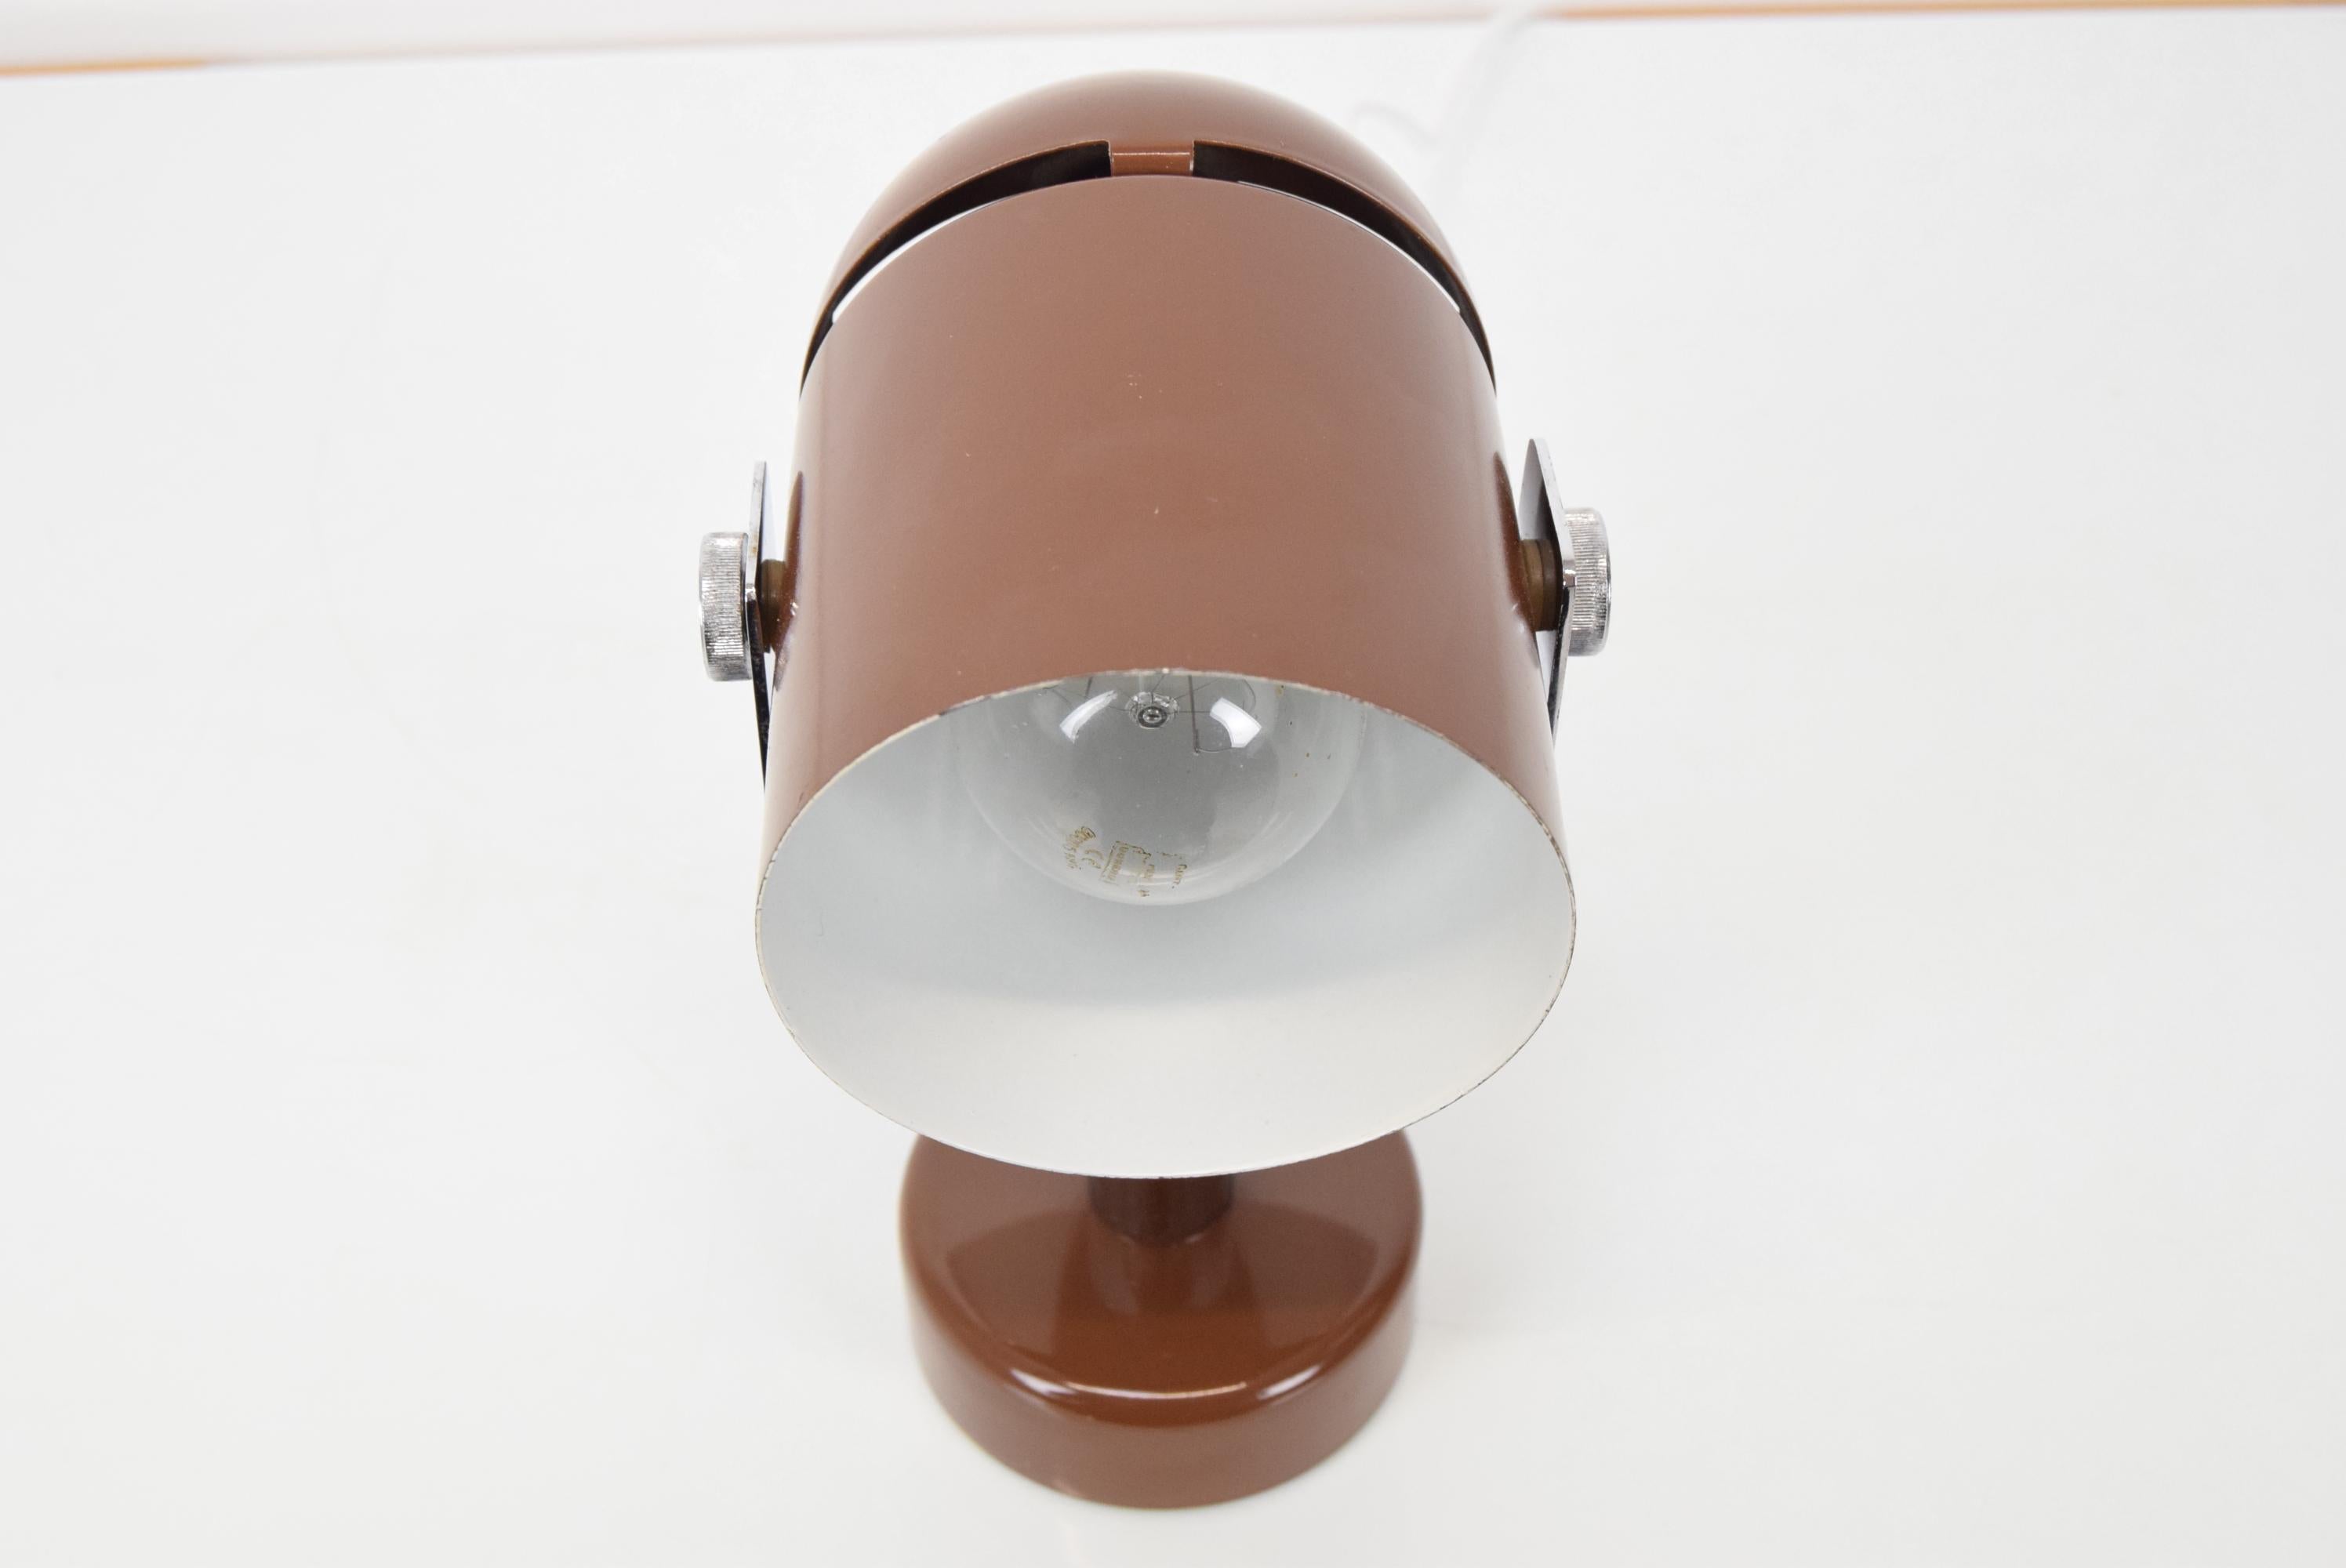 Czech Mid-Century Wall Lamp Designed by Stanislav Indra for Combi Lux, 1970's For Sale